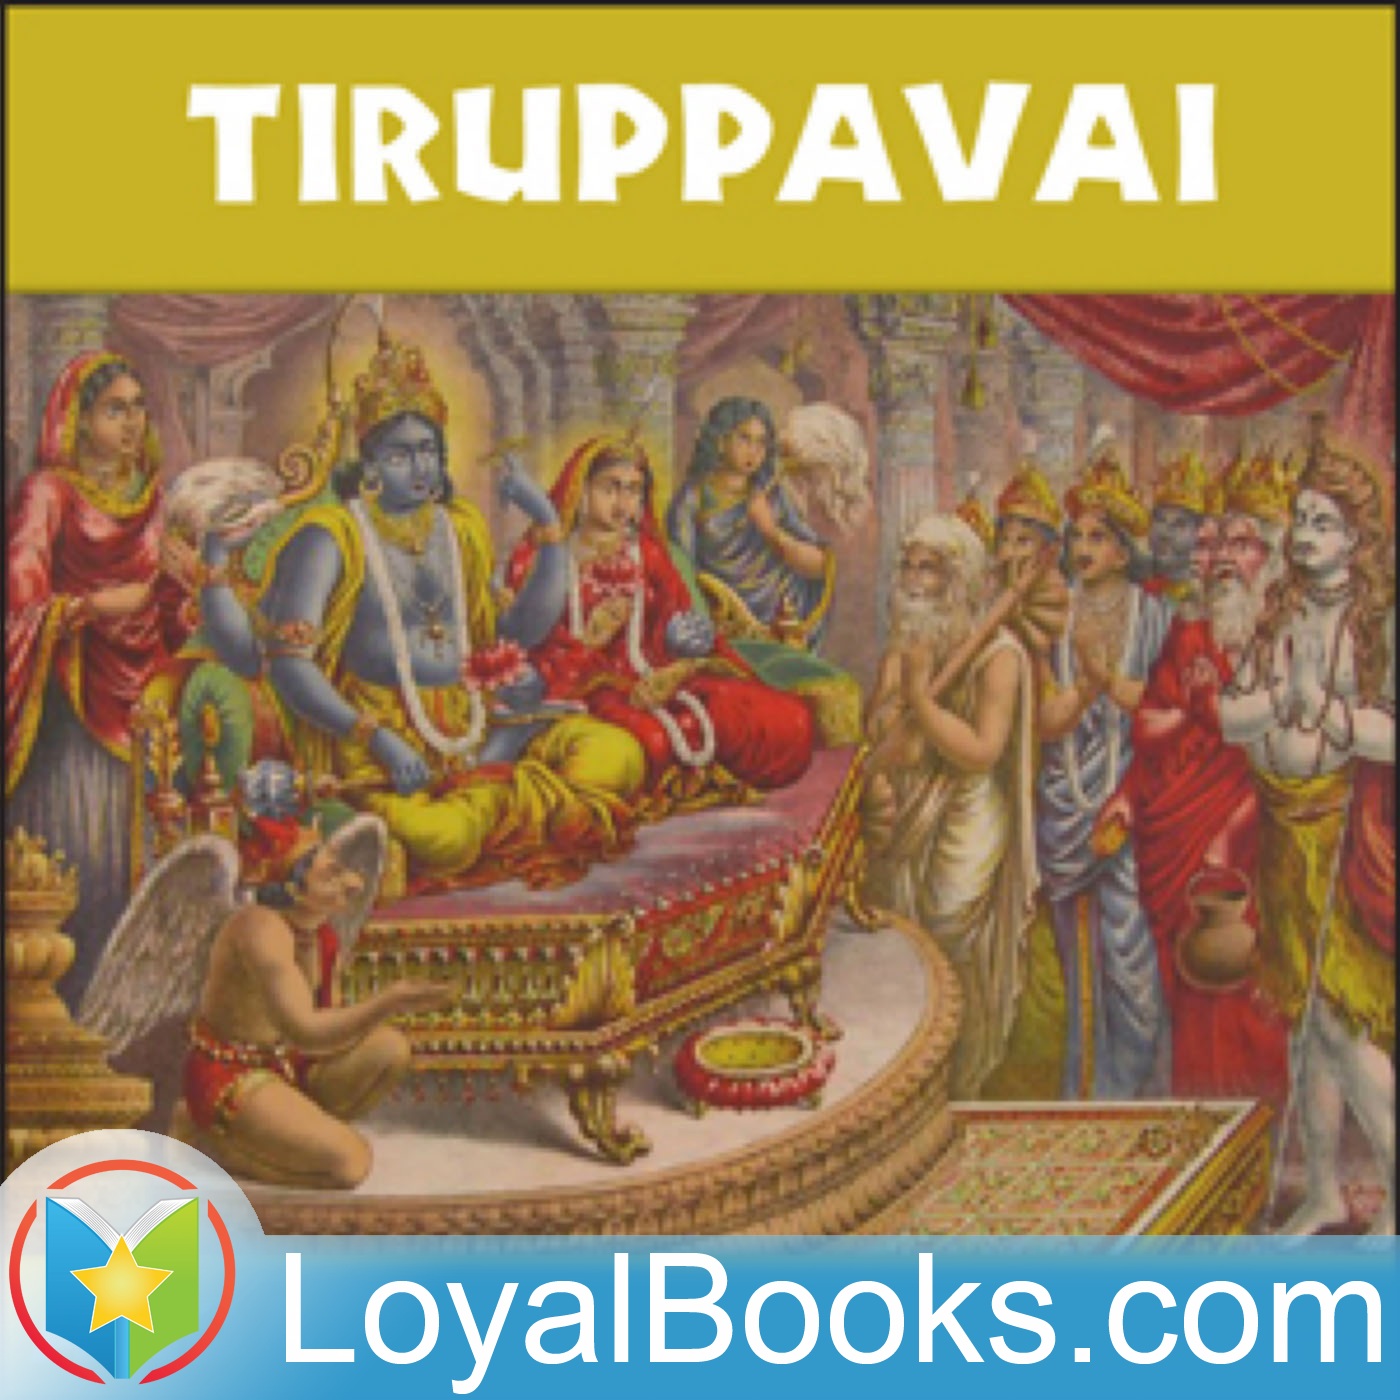 Tiruppavai by Andal